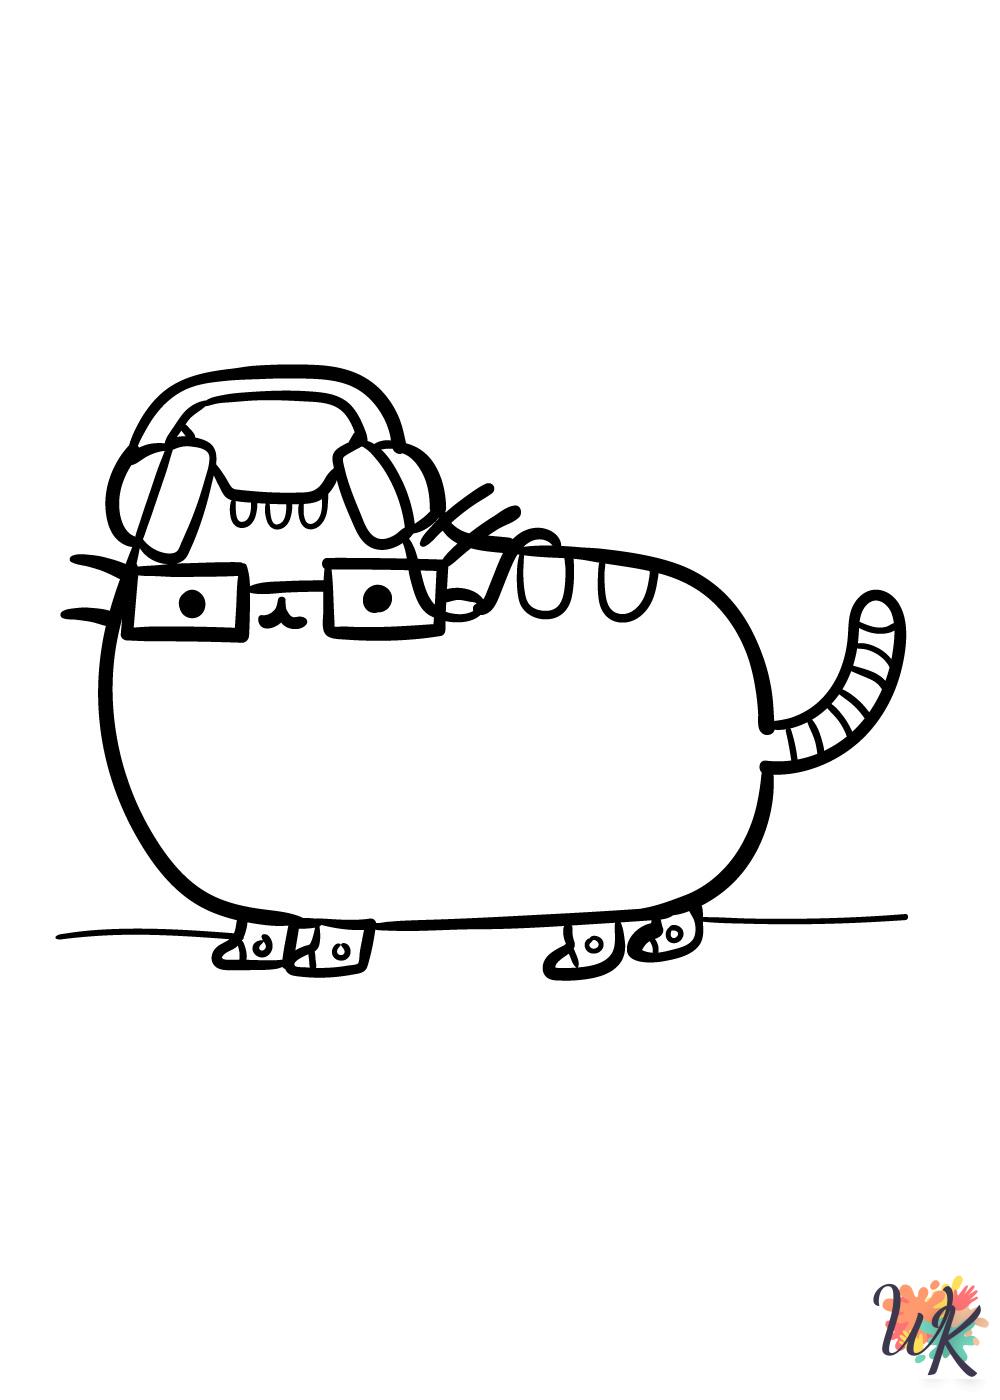 Pusheen coloring book pages